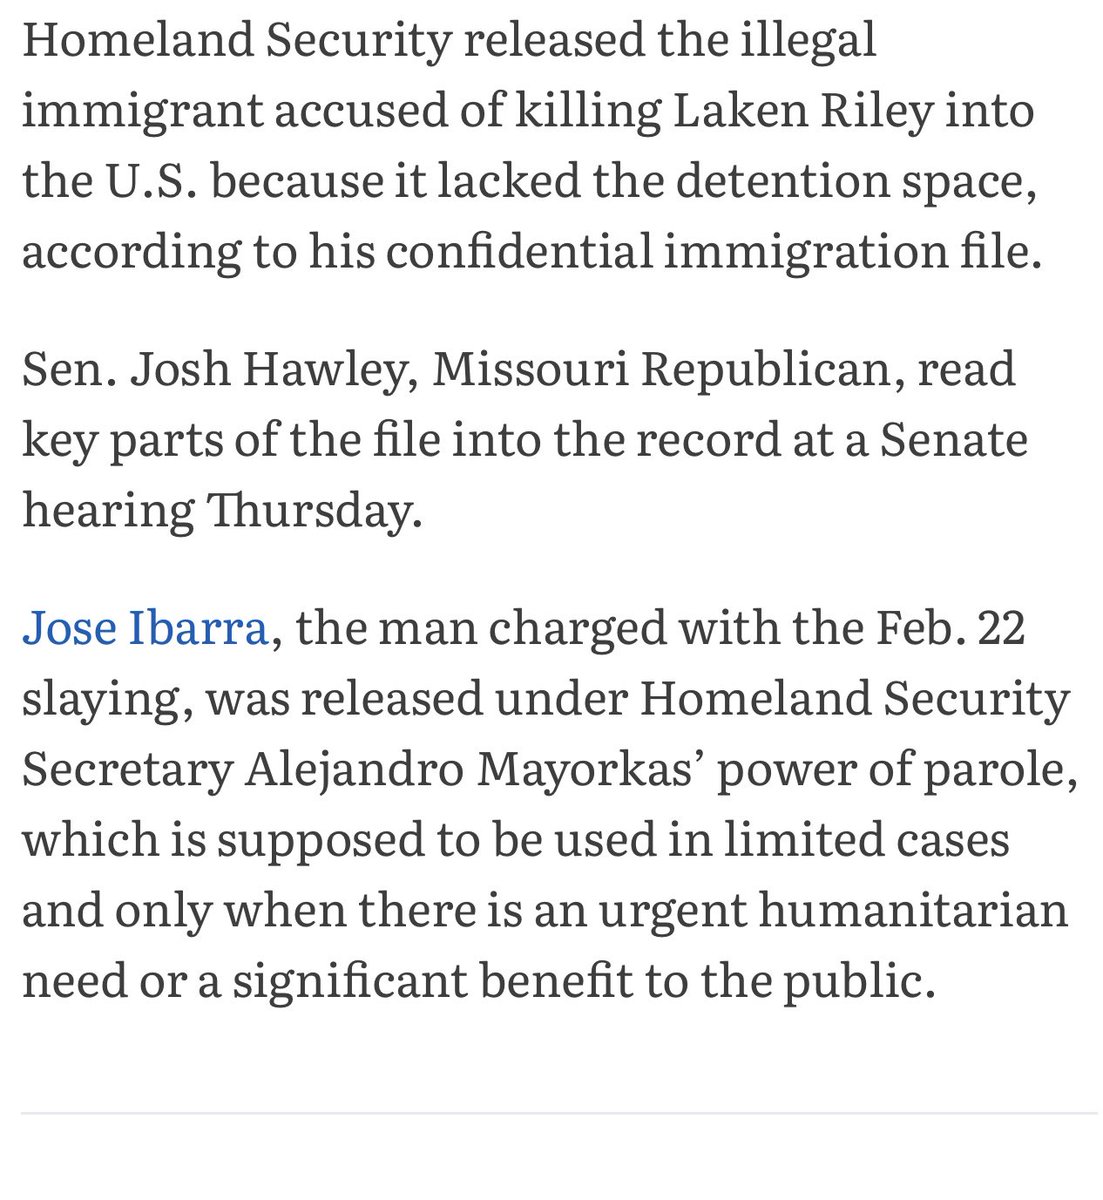 Laken Riley’s mųrder suspect was just released: “Homeland Security released the illegal immigrant accused of killing Laken Riley into the U.S. because it lacked the detention space, according to his confidential immigration file.” You don’t hate the Biden regime nearly enough.